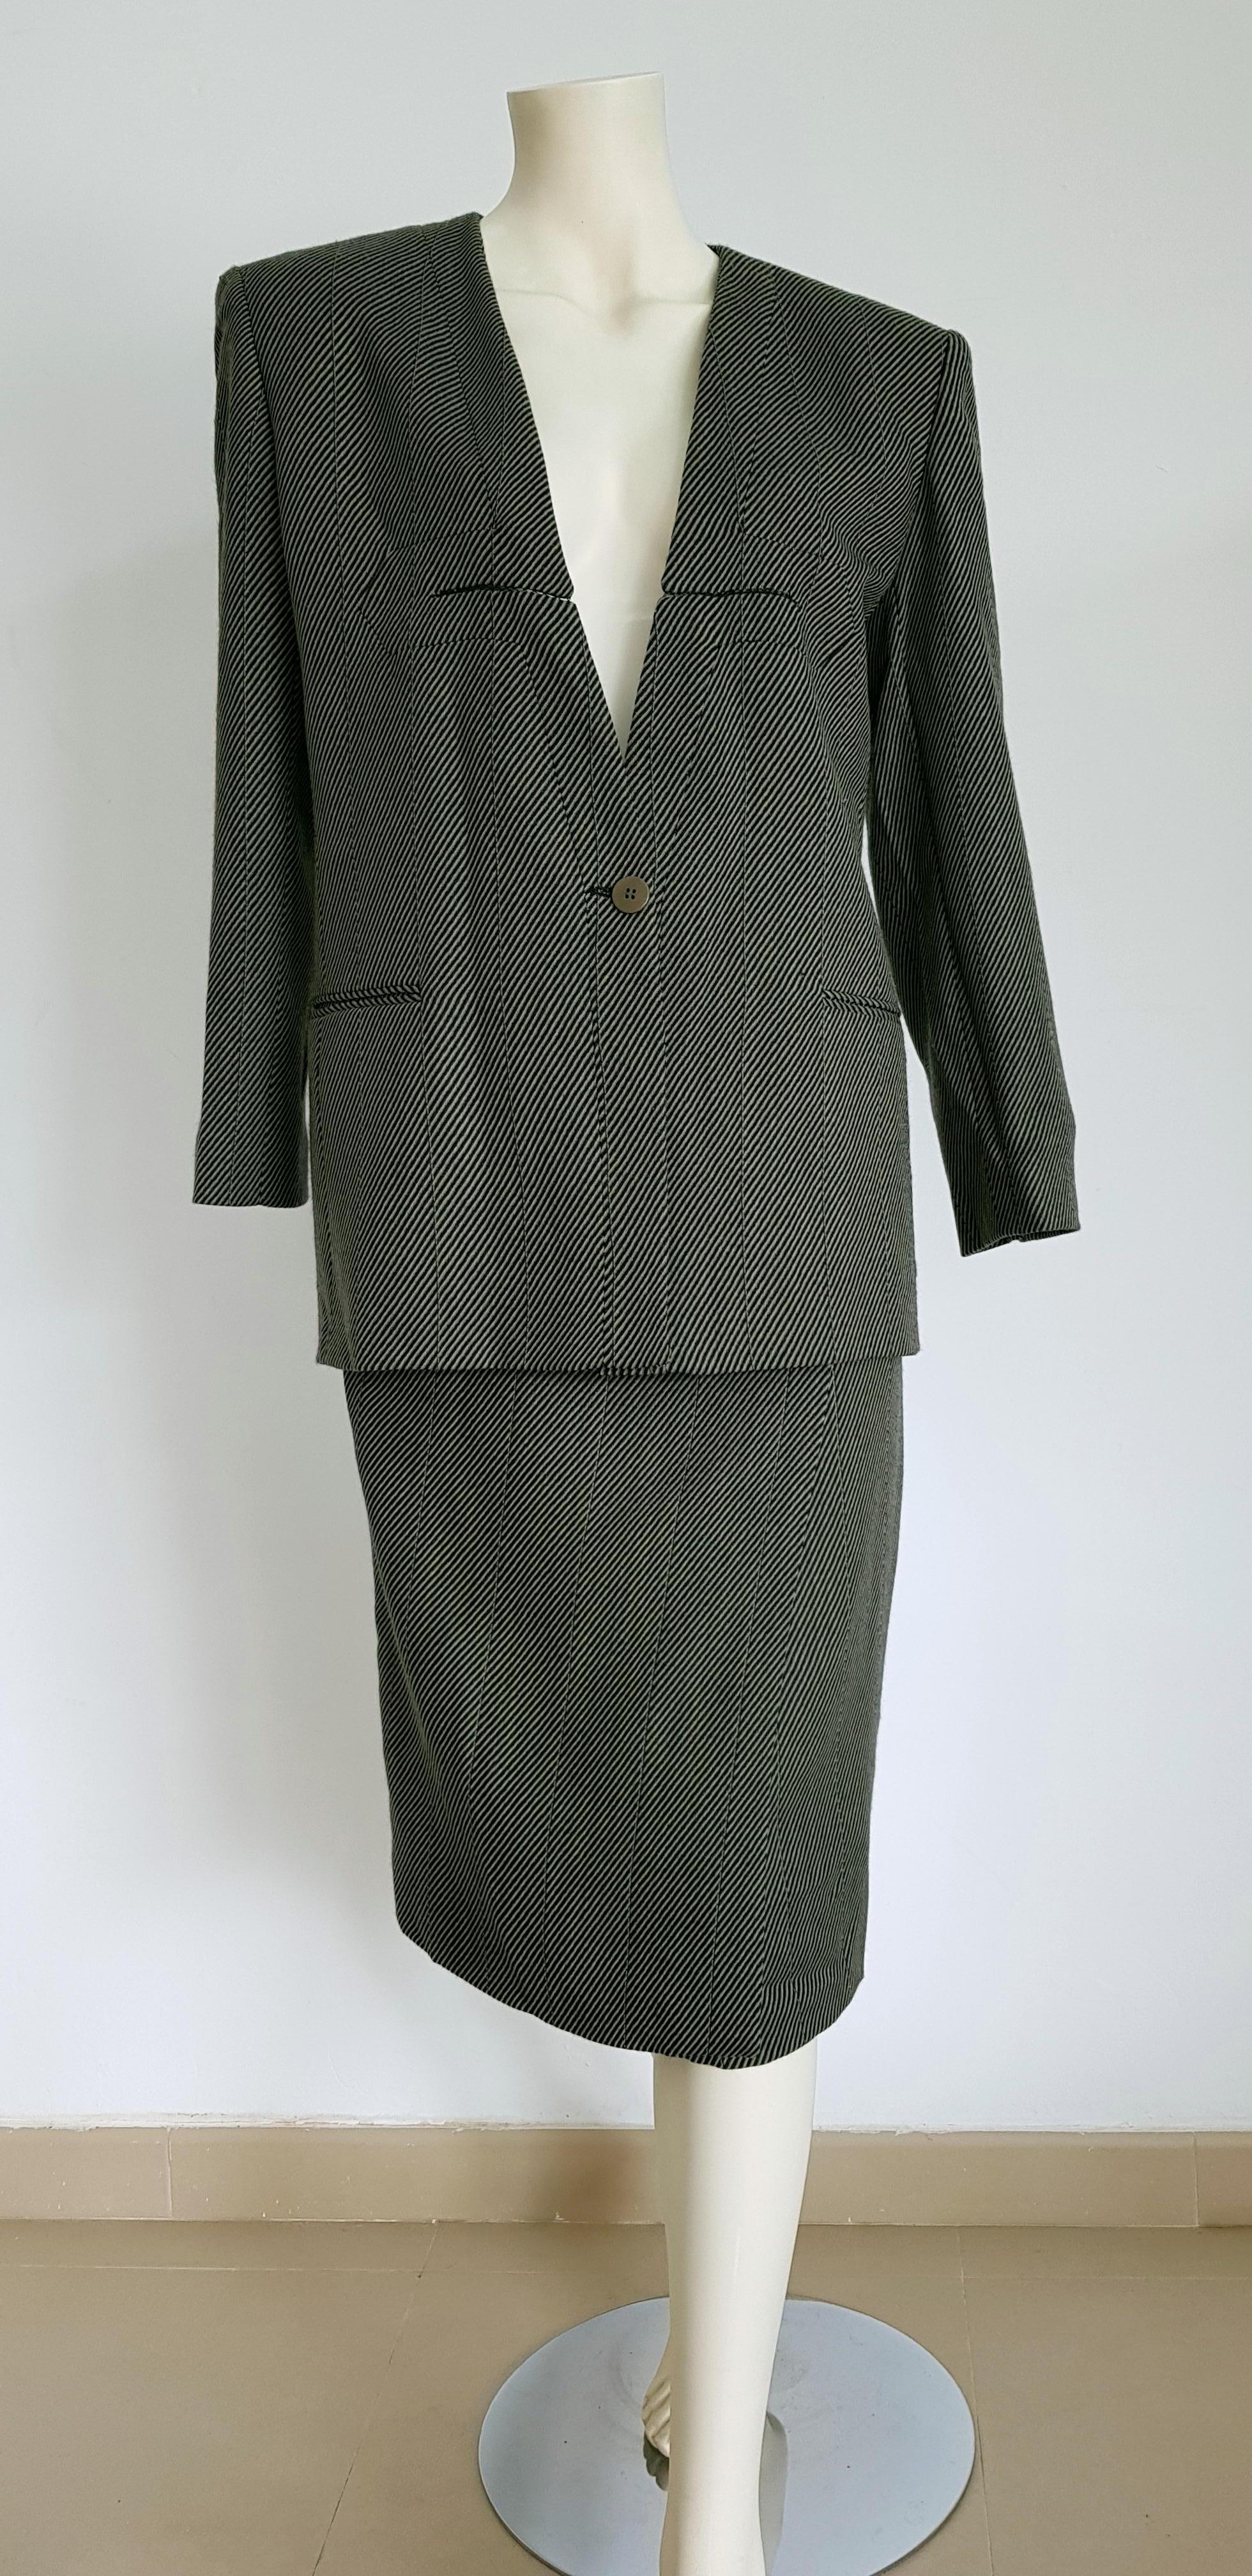 Giorgio ARMANI dark grey and light grey diagonal lines, jacket and skirt wool suit - Unworn, New.

SIZE: equivalent to about Small / Medium, please review approx measurements as follows in cm. 
JACKET: lenght 75, chest underarm to underarm 50, bust